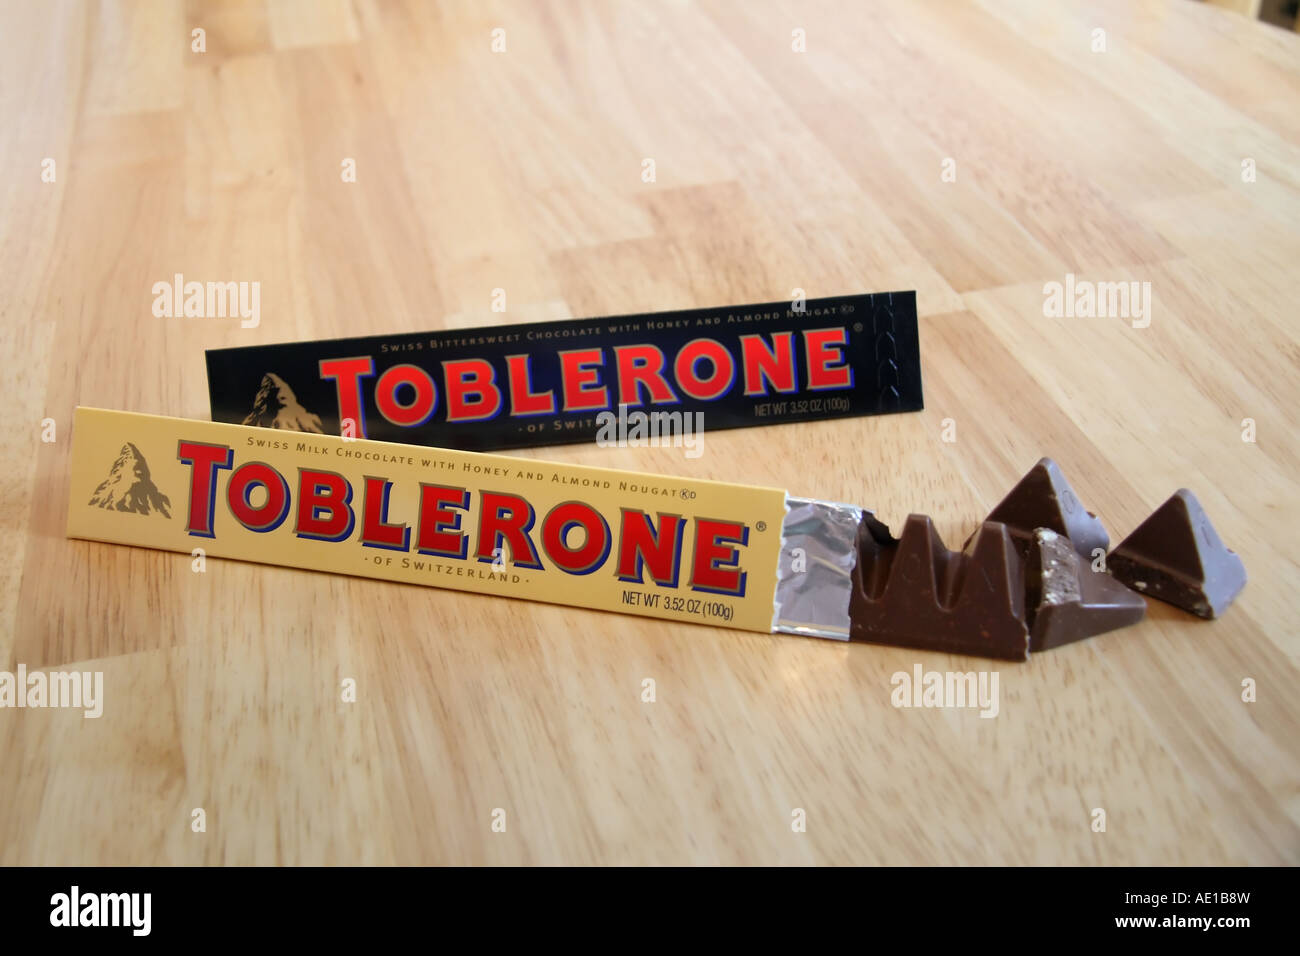 A swiss import, here in the United States, Toblerone chocolate candy bars. Stock Photo